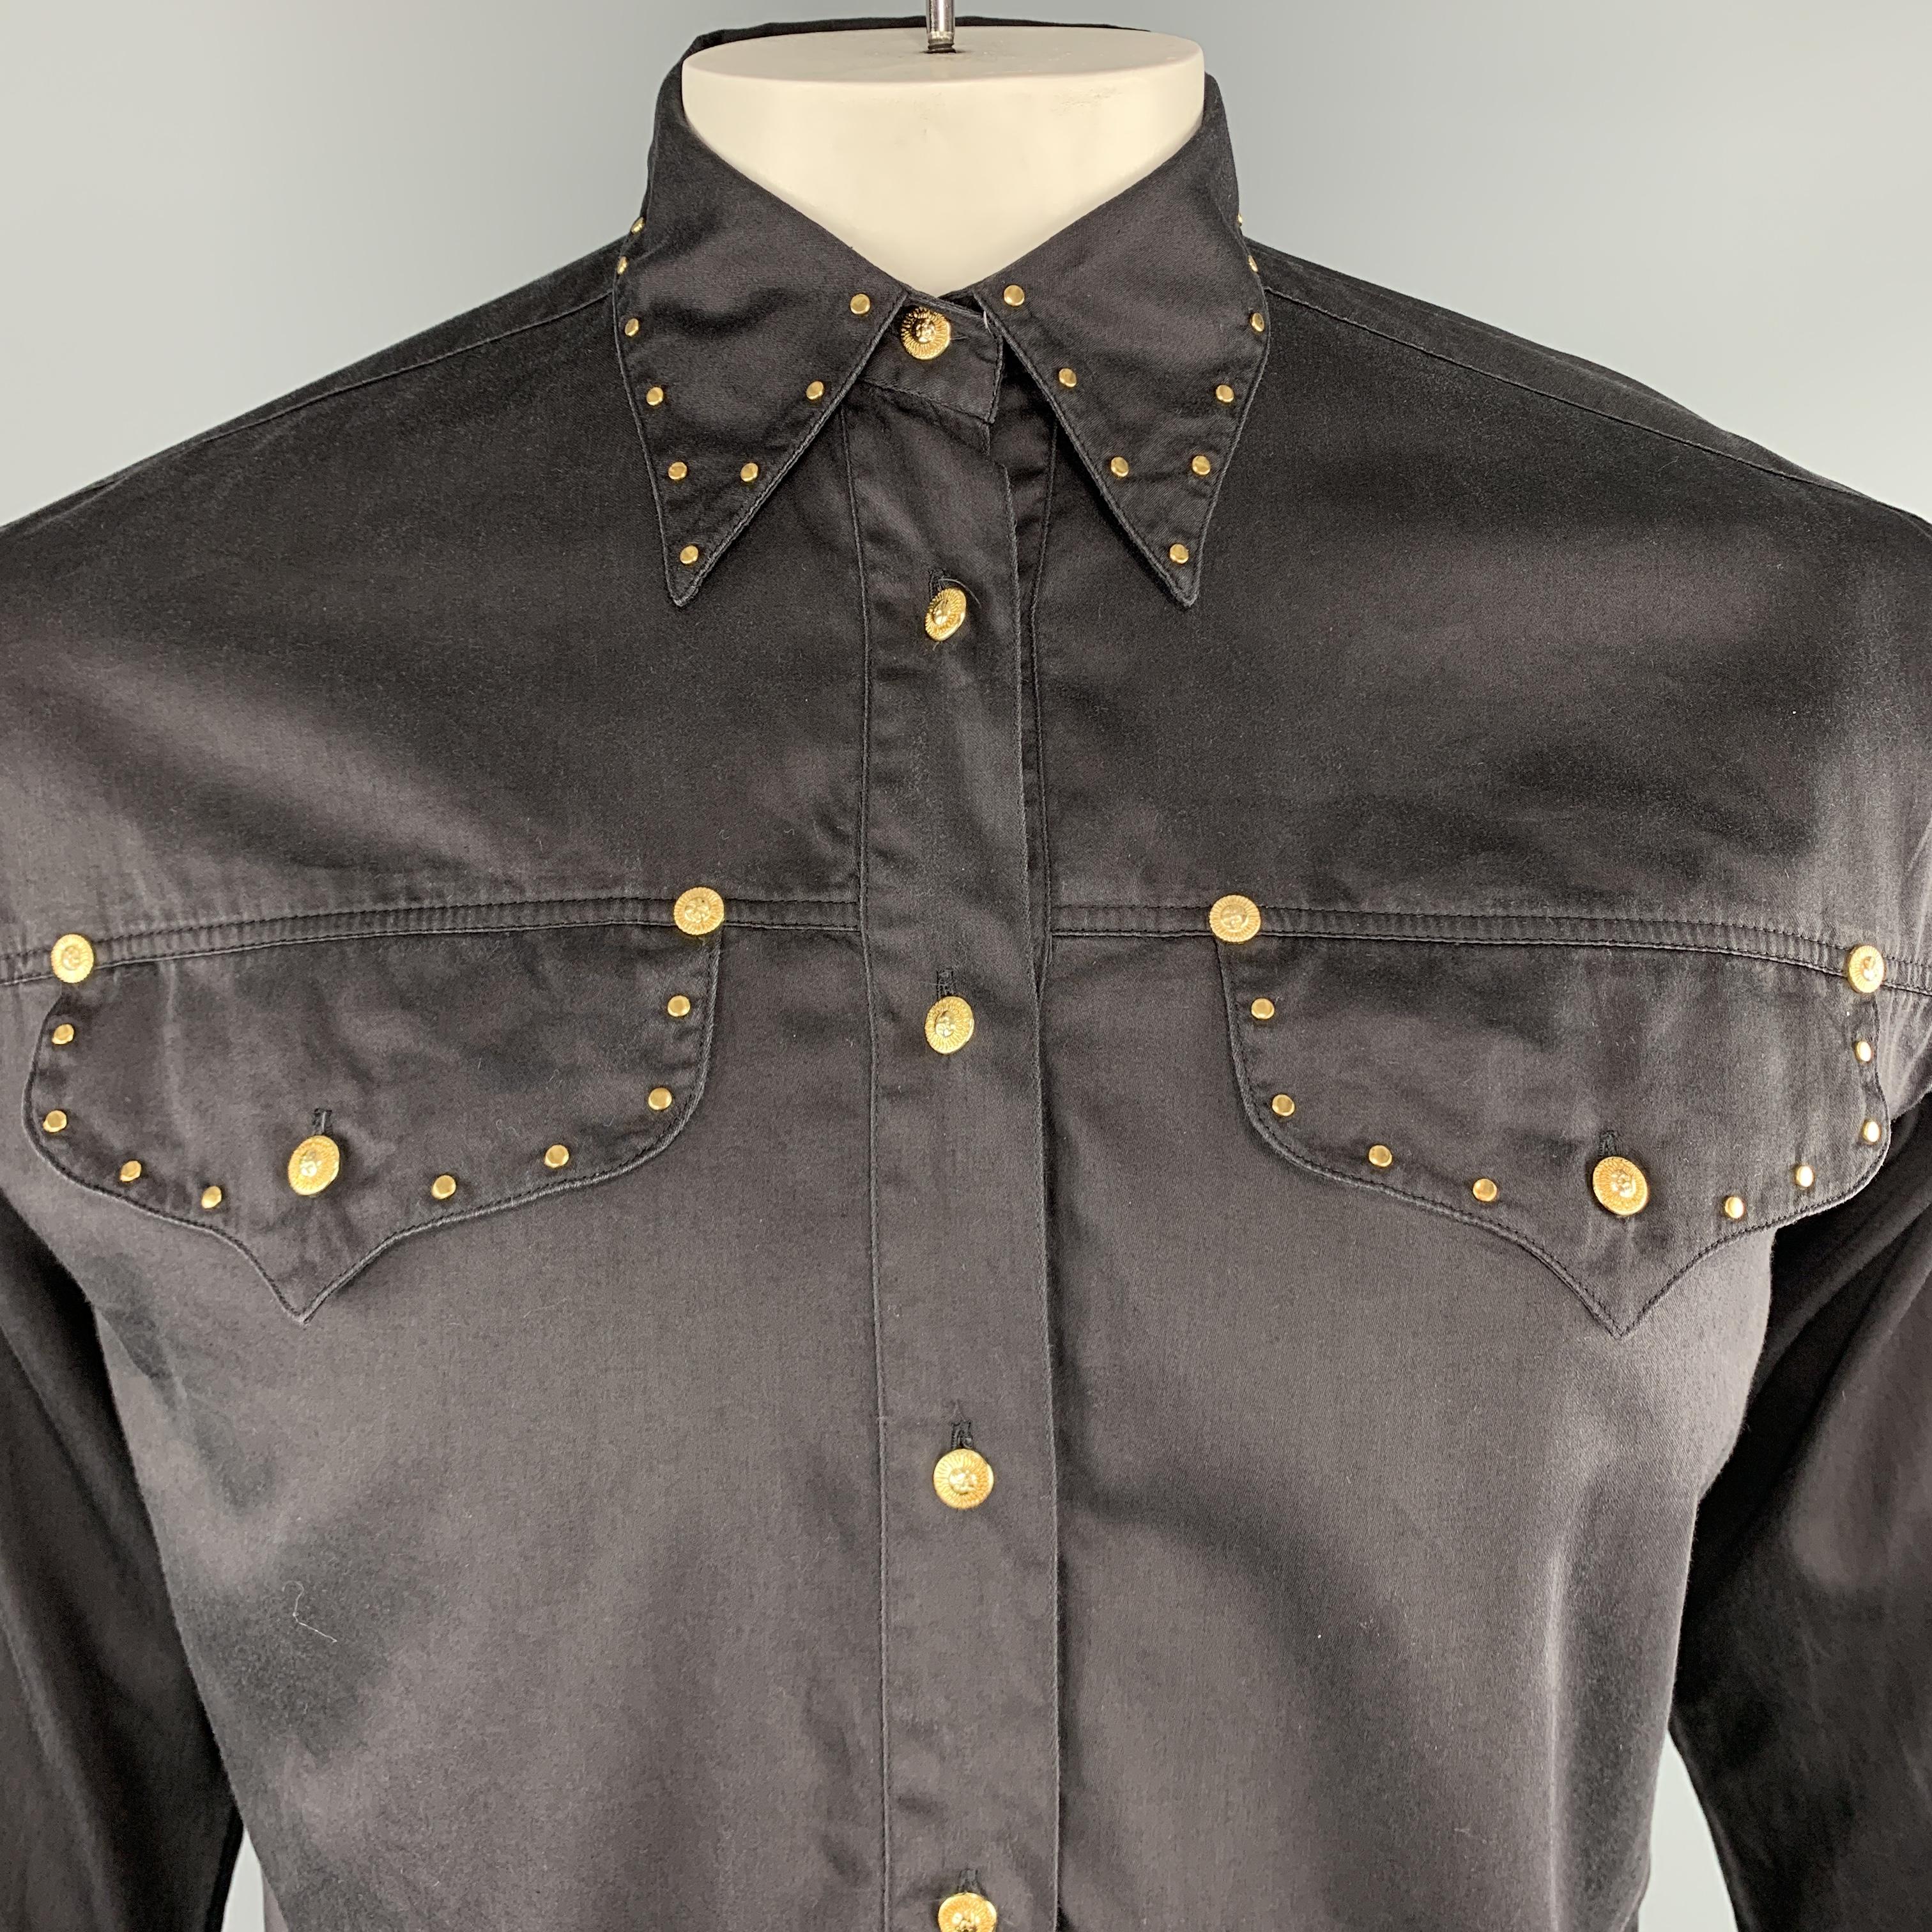 Vintage VERSACE JEANS COUTURE western cowboy style shirt comes in black cotton with a pointed collar, and patch flap pockets with yellow gold tone sun face studs and buttons. Made in Italy.

Very Good Pre-Owned Condition.
Marked: